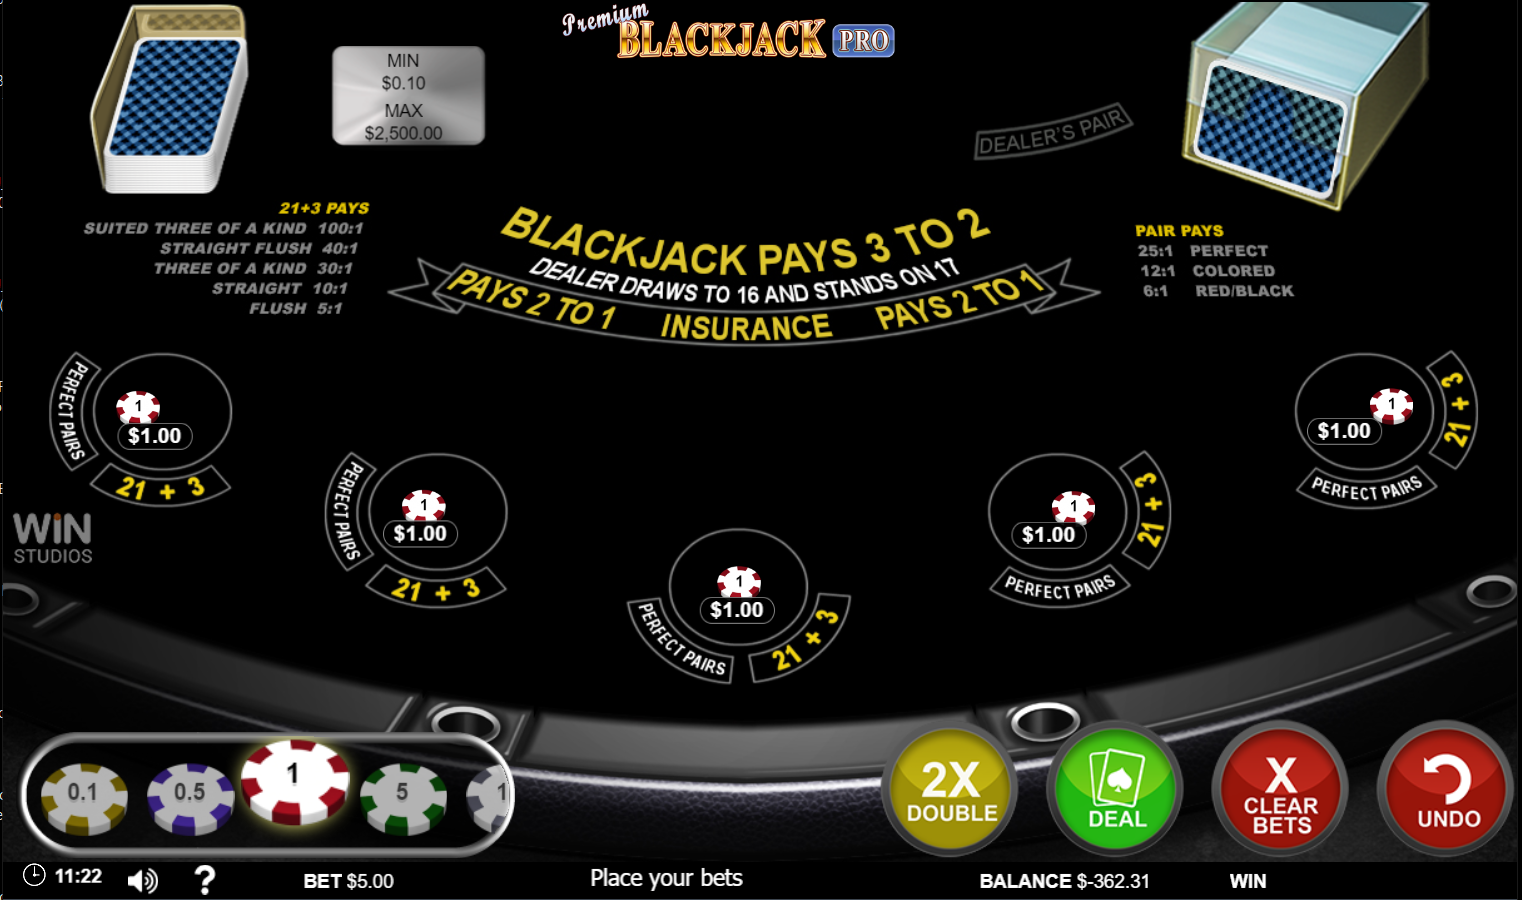 Blackjack Perfect Pairs: what is it and how much does it pay?